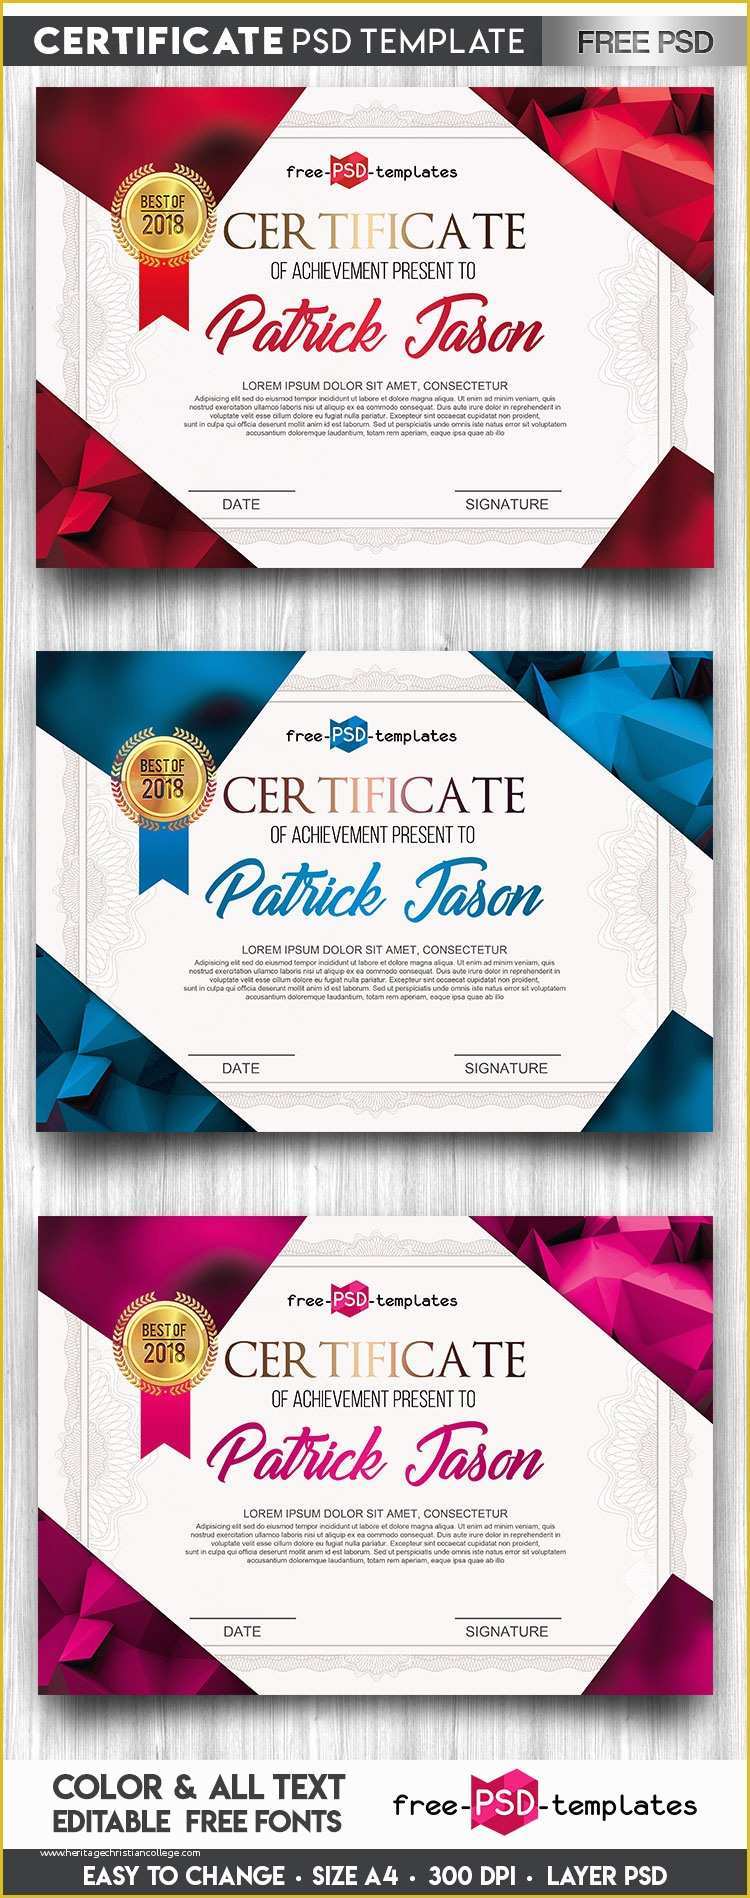 Free Psd Certificate Templates Download Of Free Certificate Template In Psd